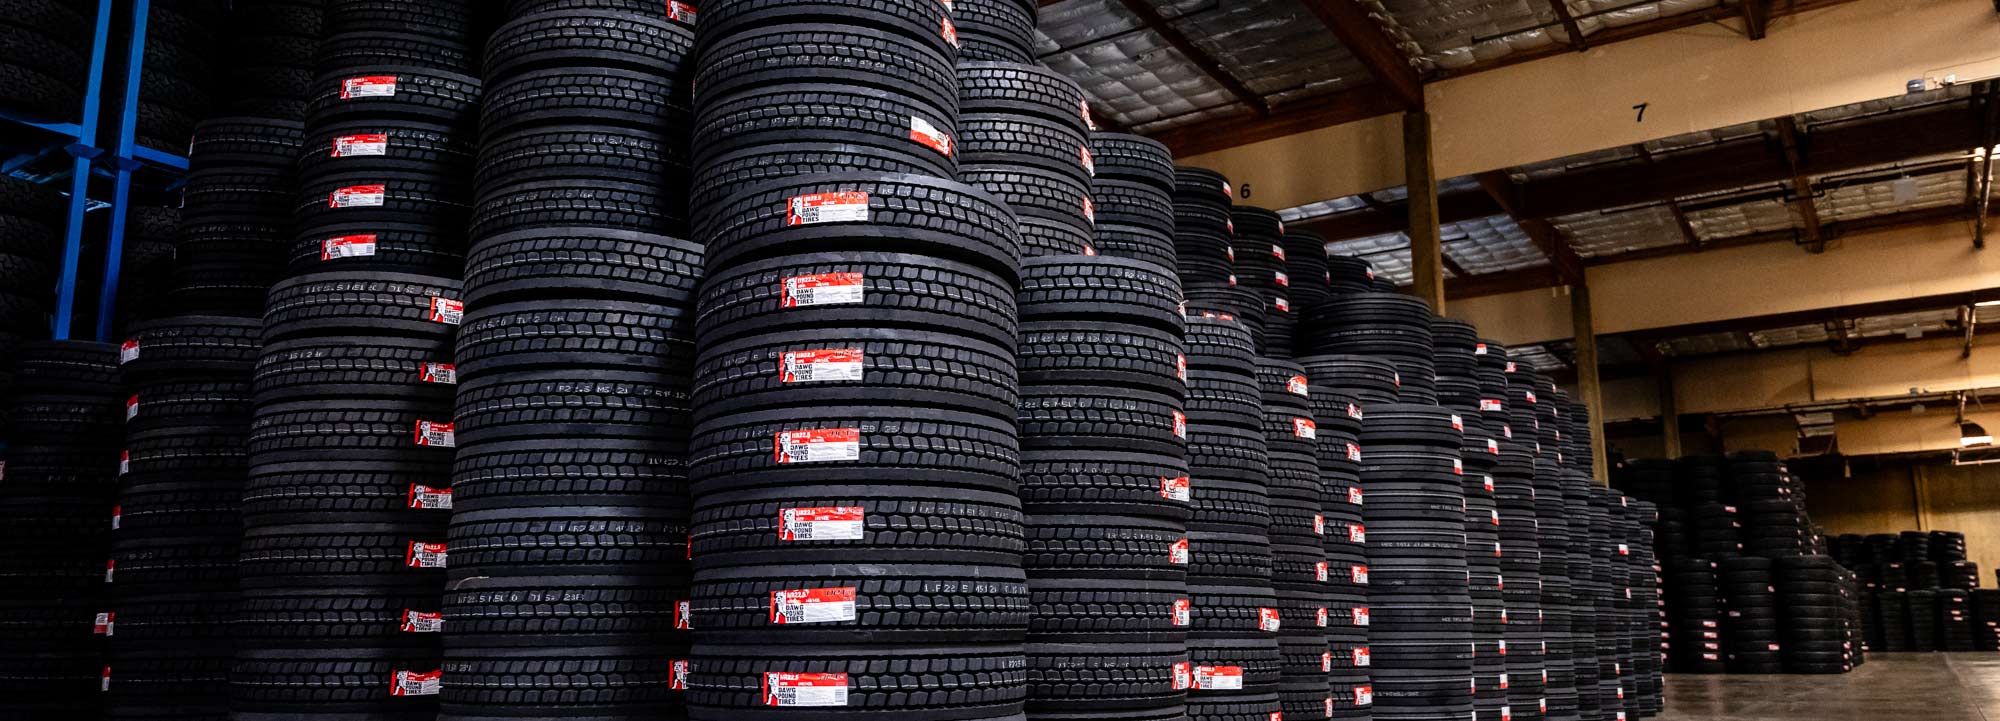 Stacks of large OTR tires sit in a East Bay Tire facility